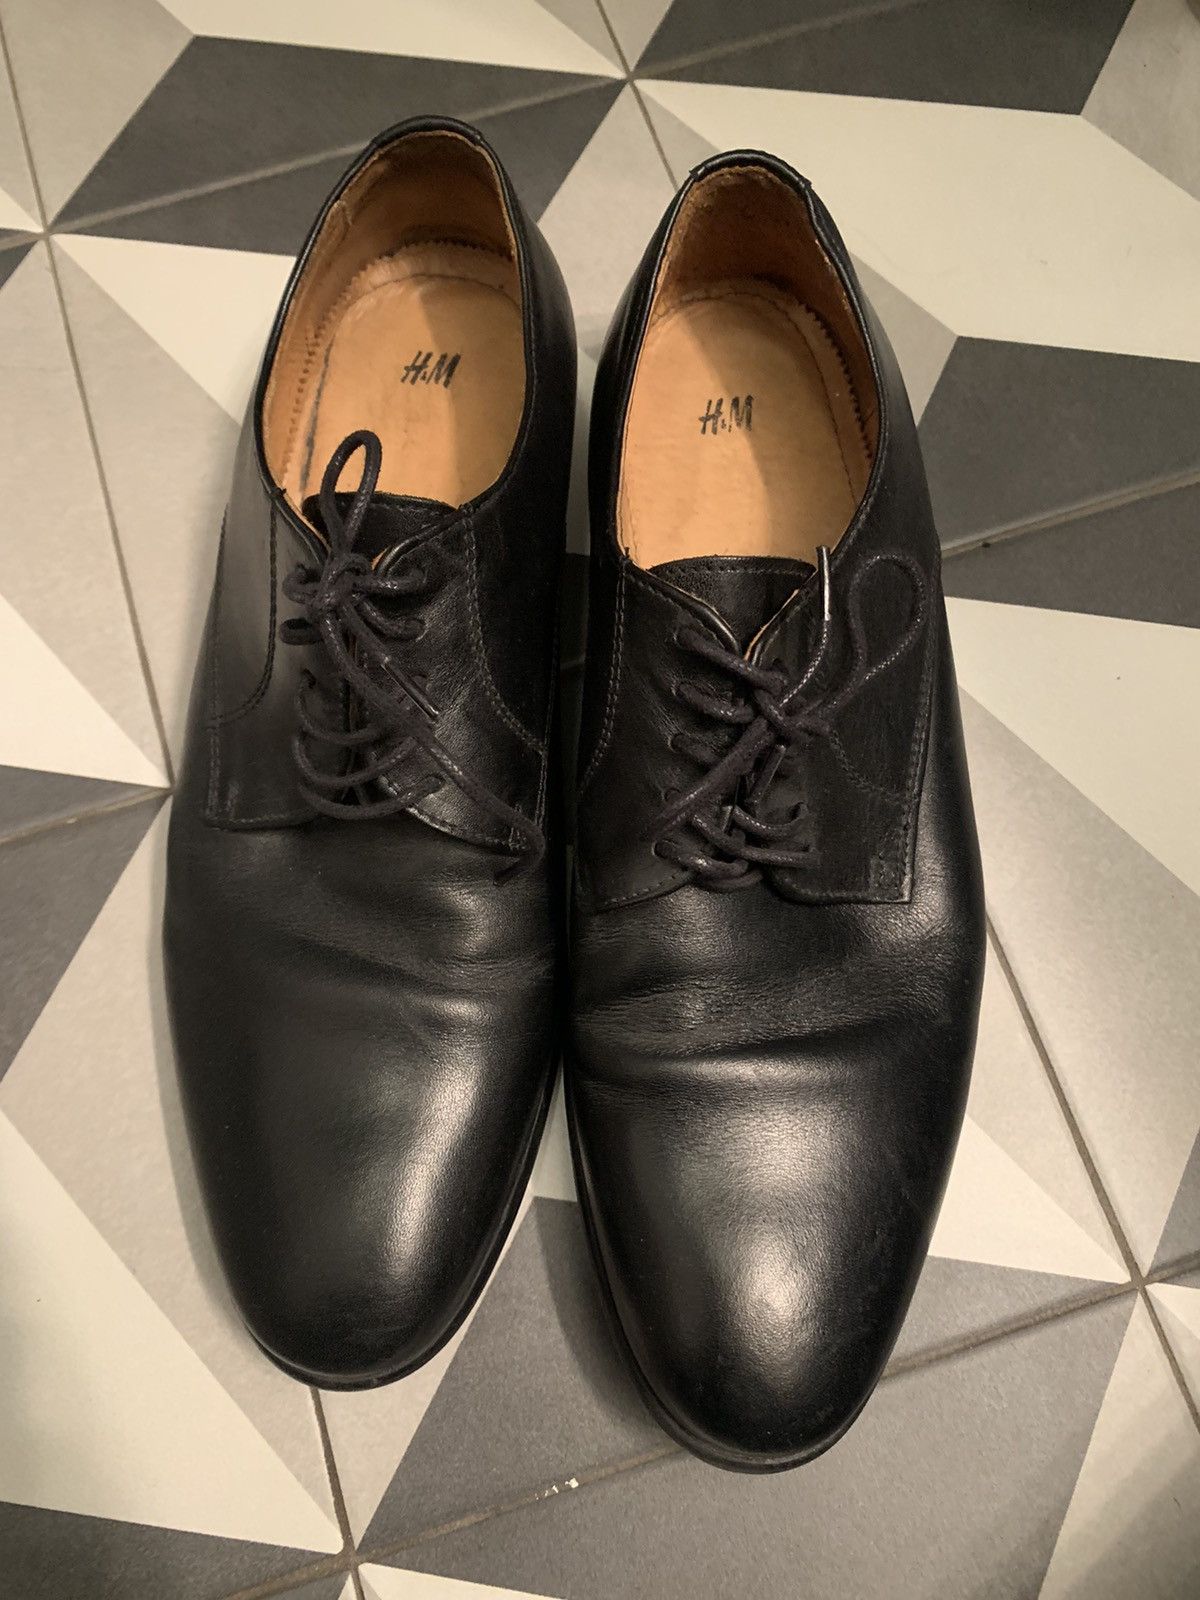 H&M Premium leather derbies dress shoes made in Portugal | Grailed